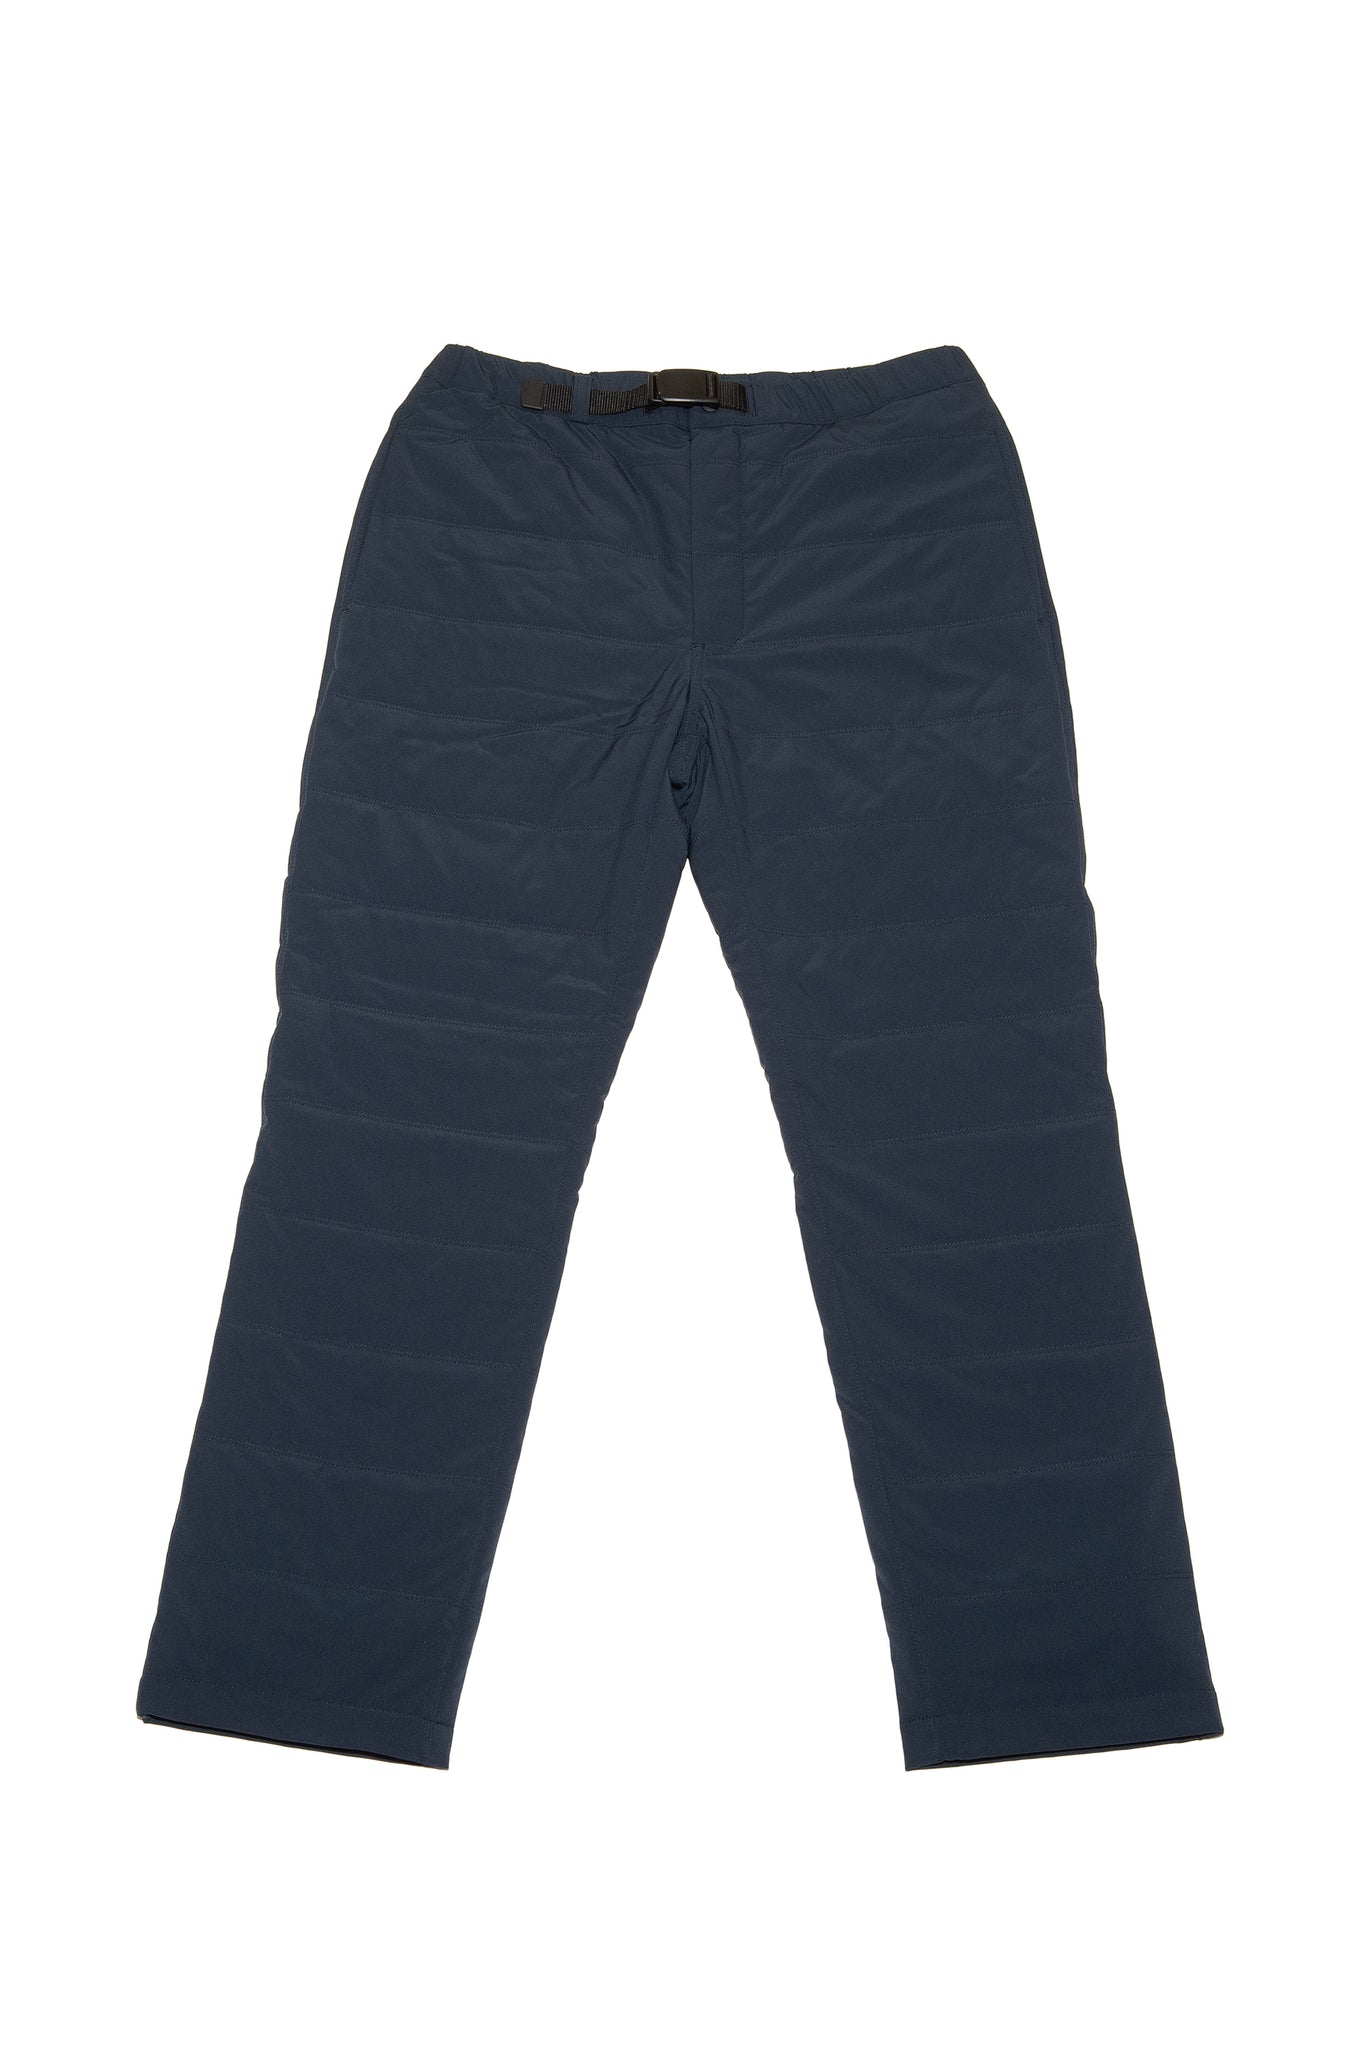 FLEXIBLE INSULATED PANTS - NAVY